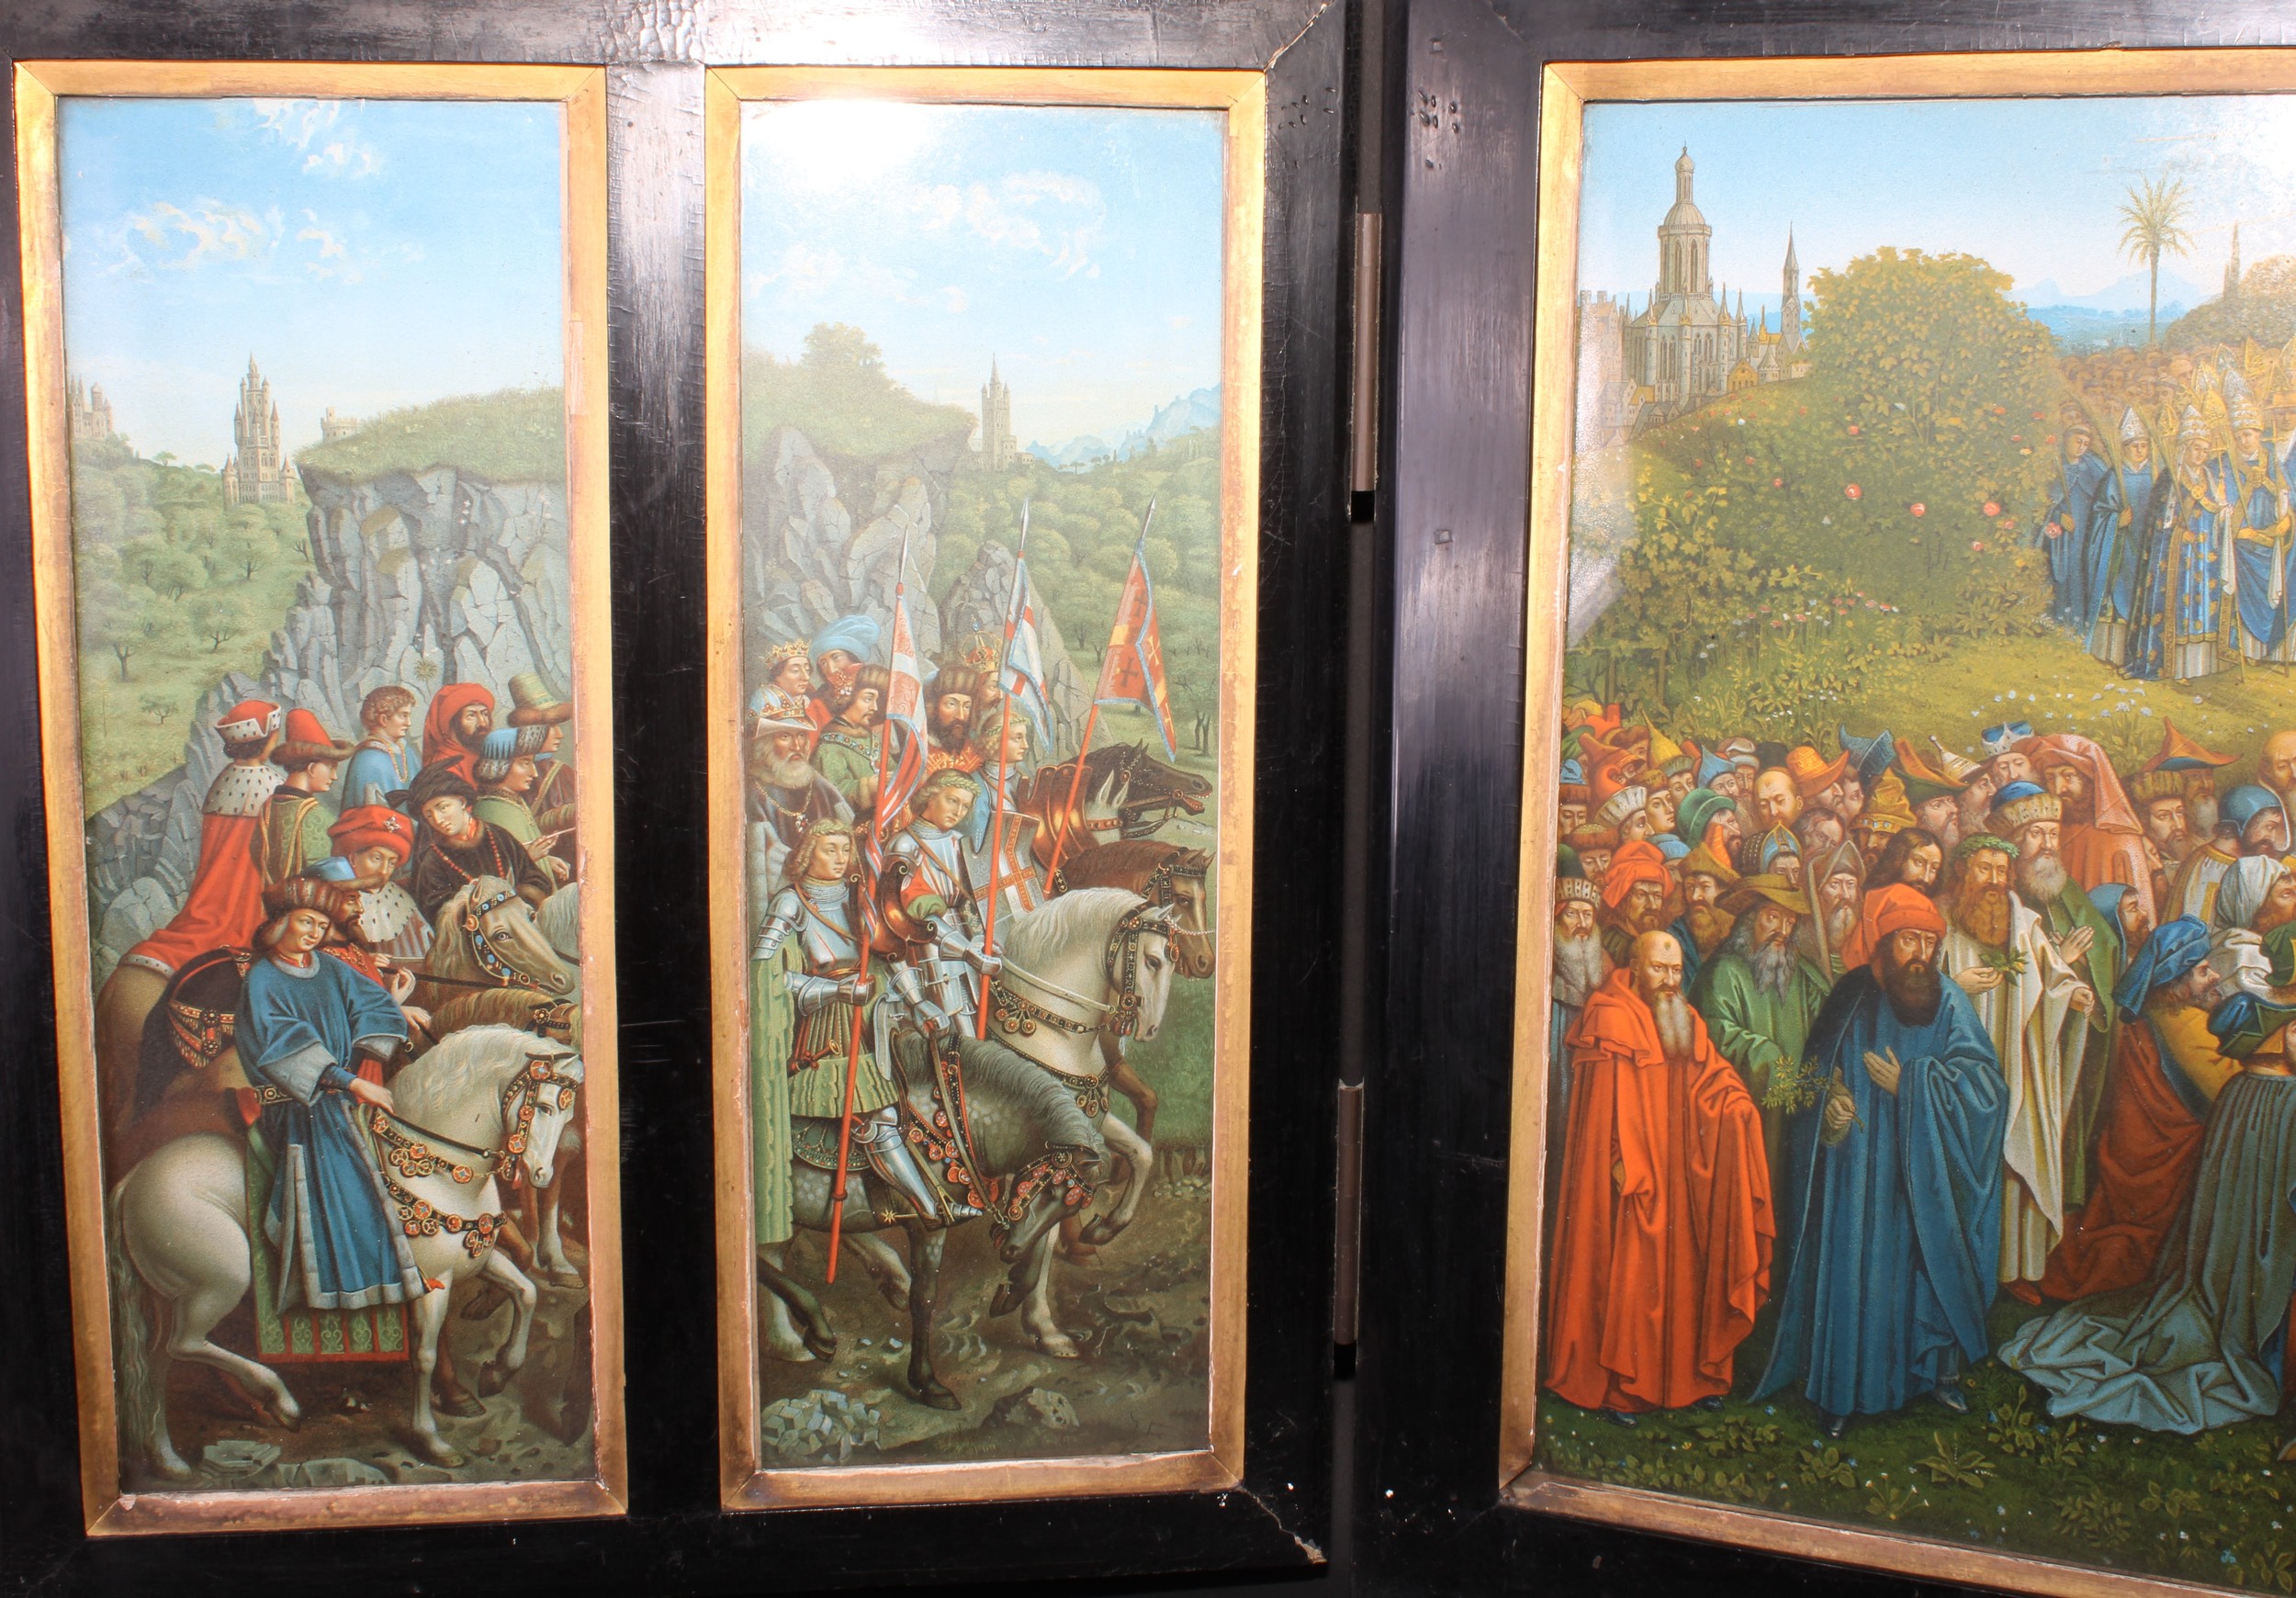 A late 19th/early 20th century antiquarian's facsimile triptych, after the Ghent altarpiece, the - Image 2 of 4